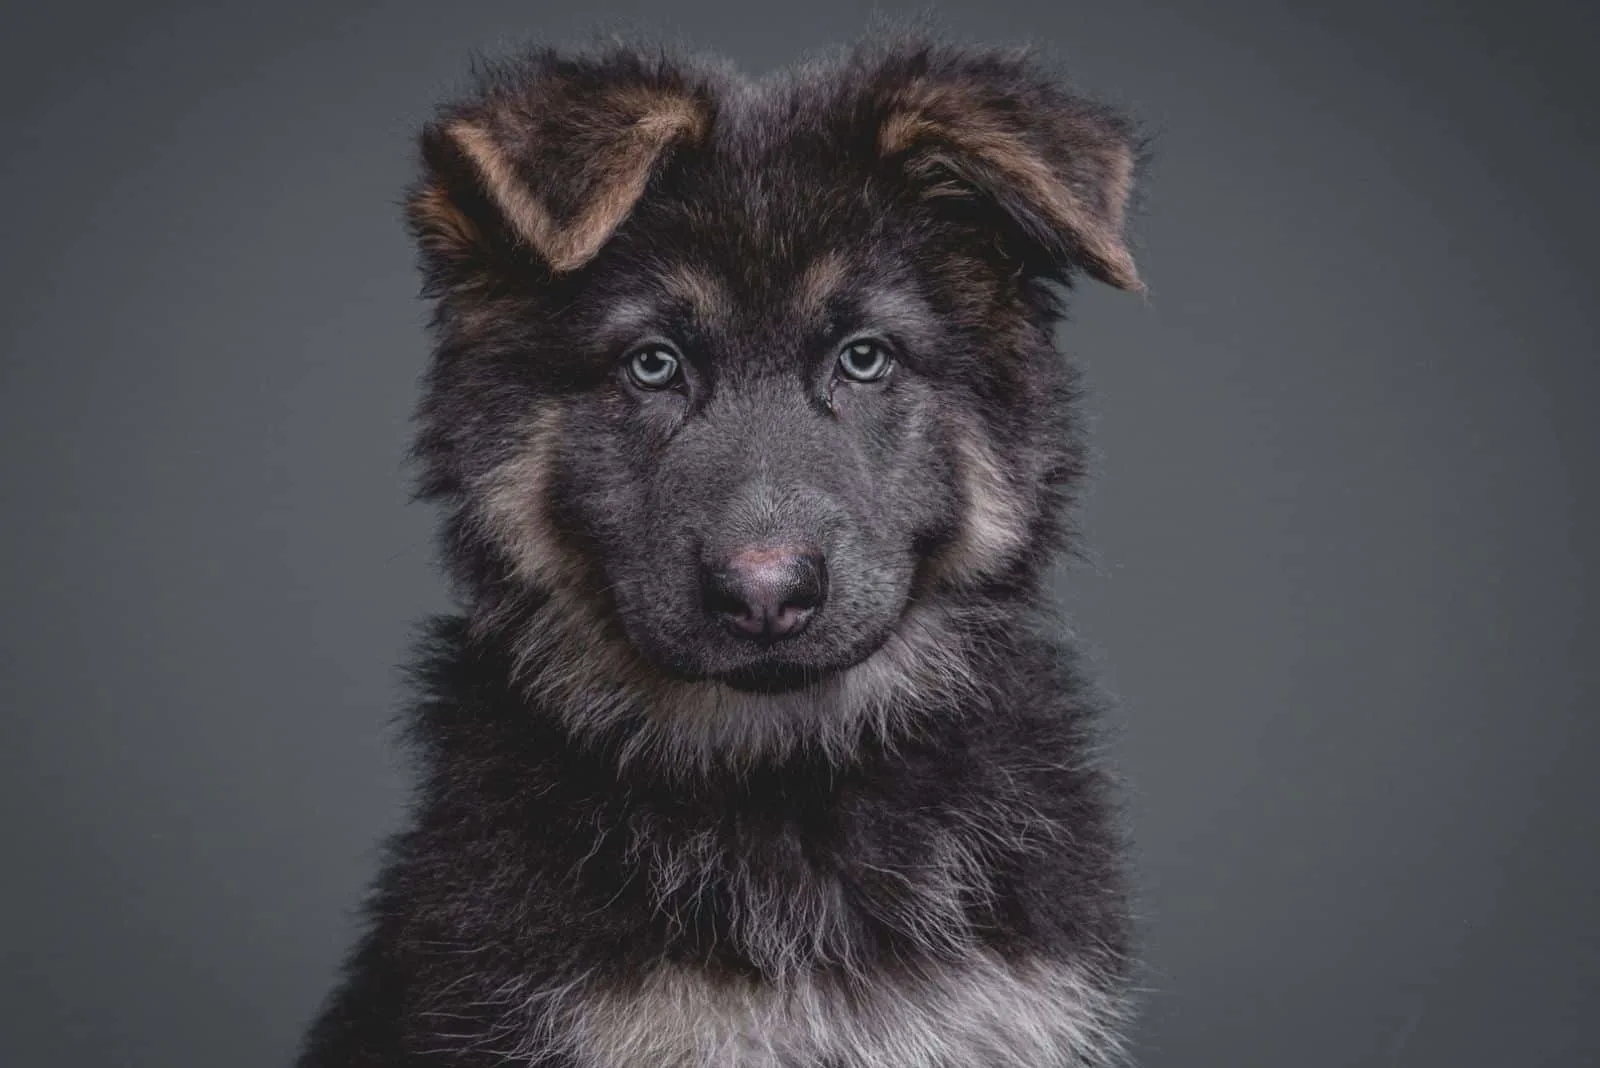 Adorable German Shepherd puppy with blue eyes